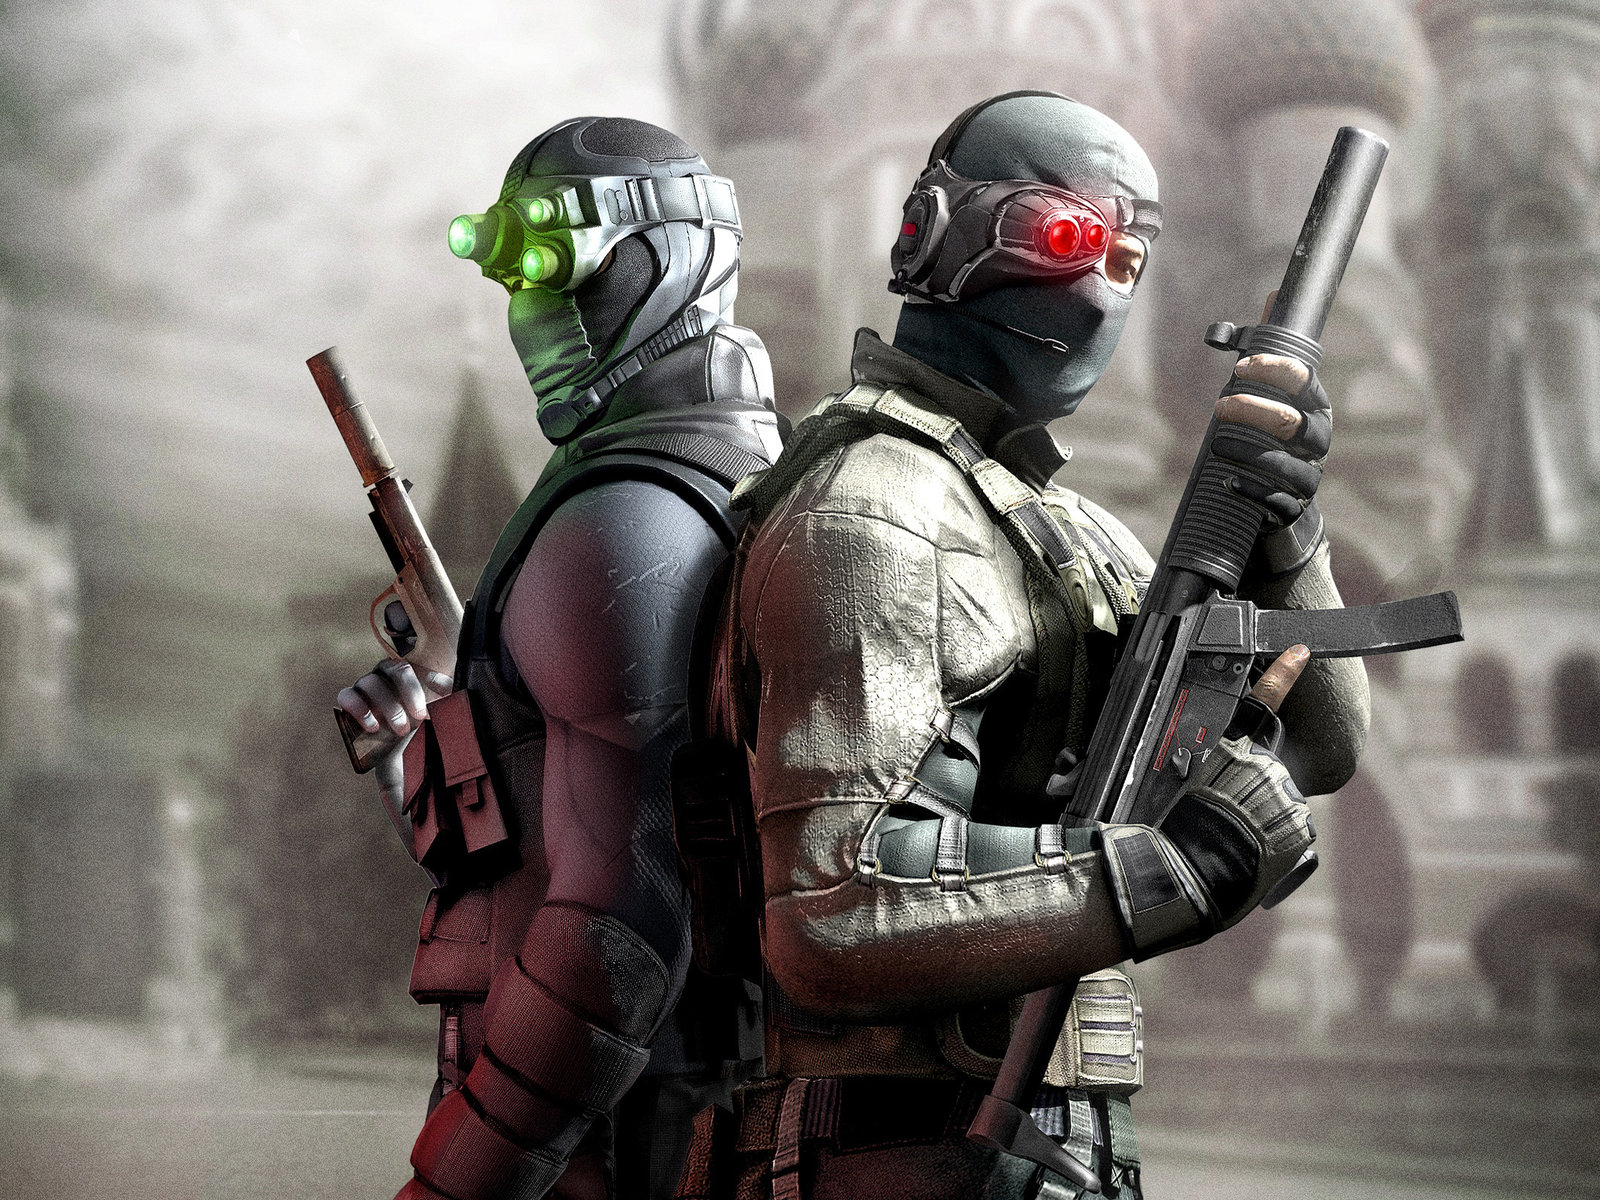 New Game Splinter Cell Conviction Wallpaper And Image